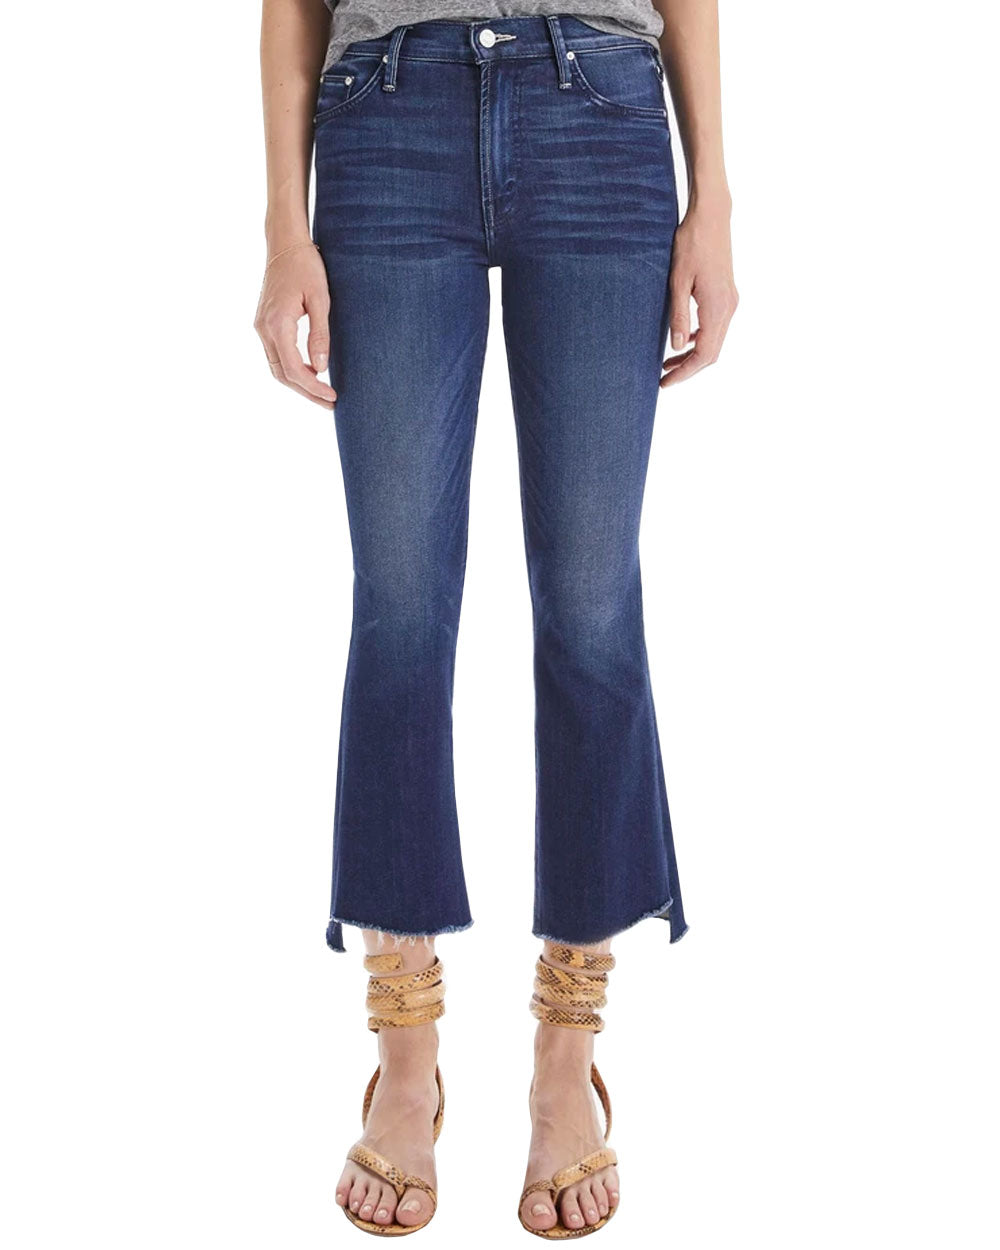 The Insider Crop Step Fray Jean in Tongue In Chic